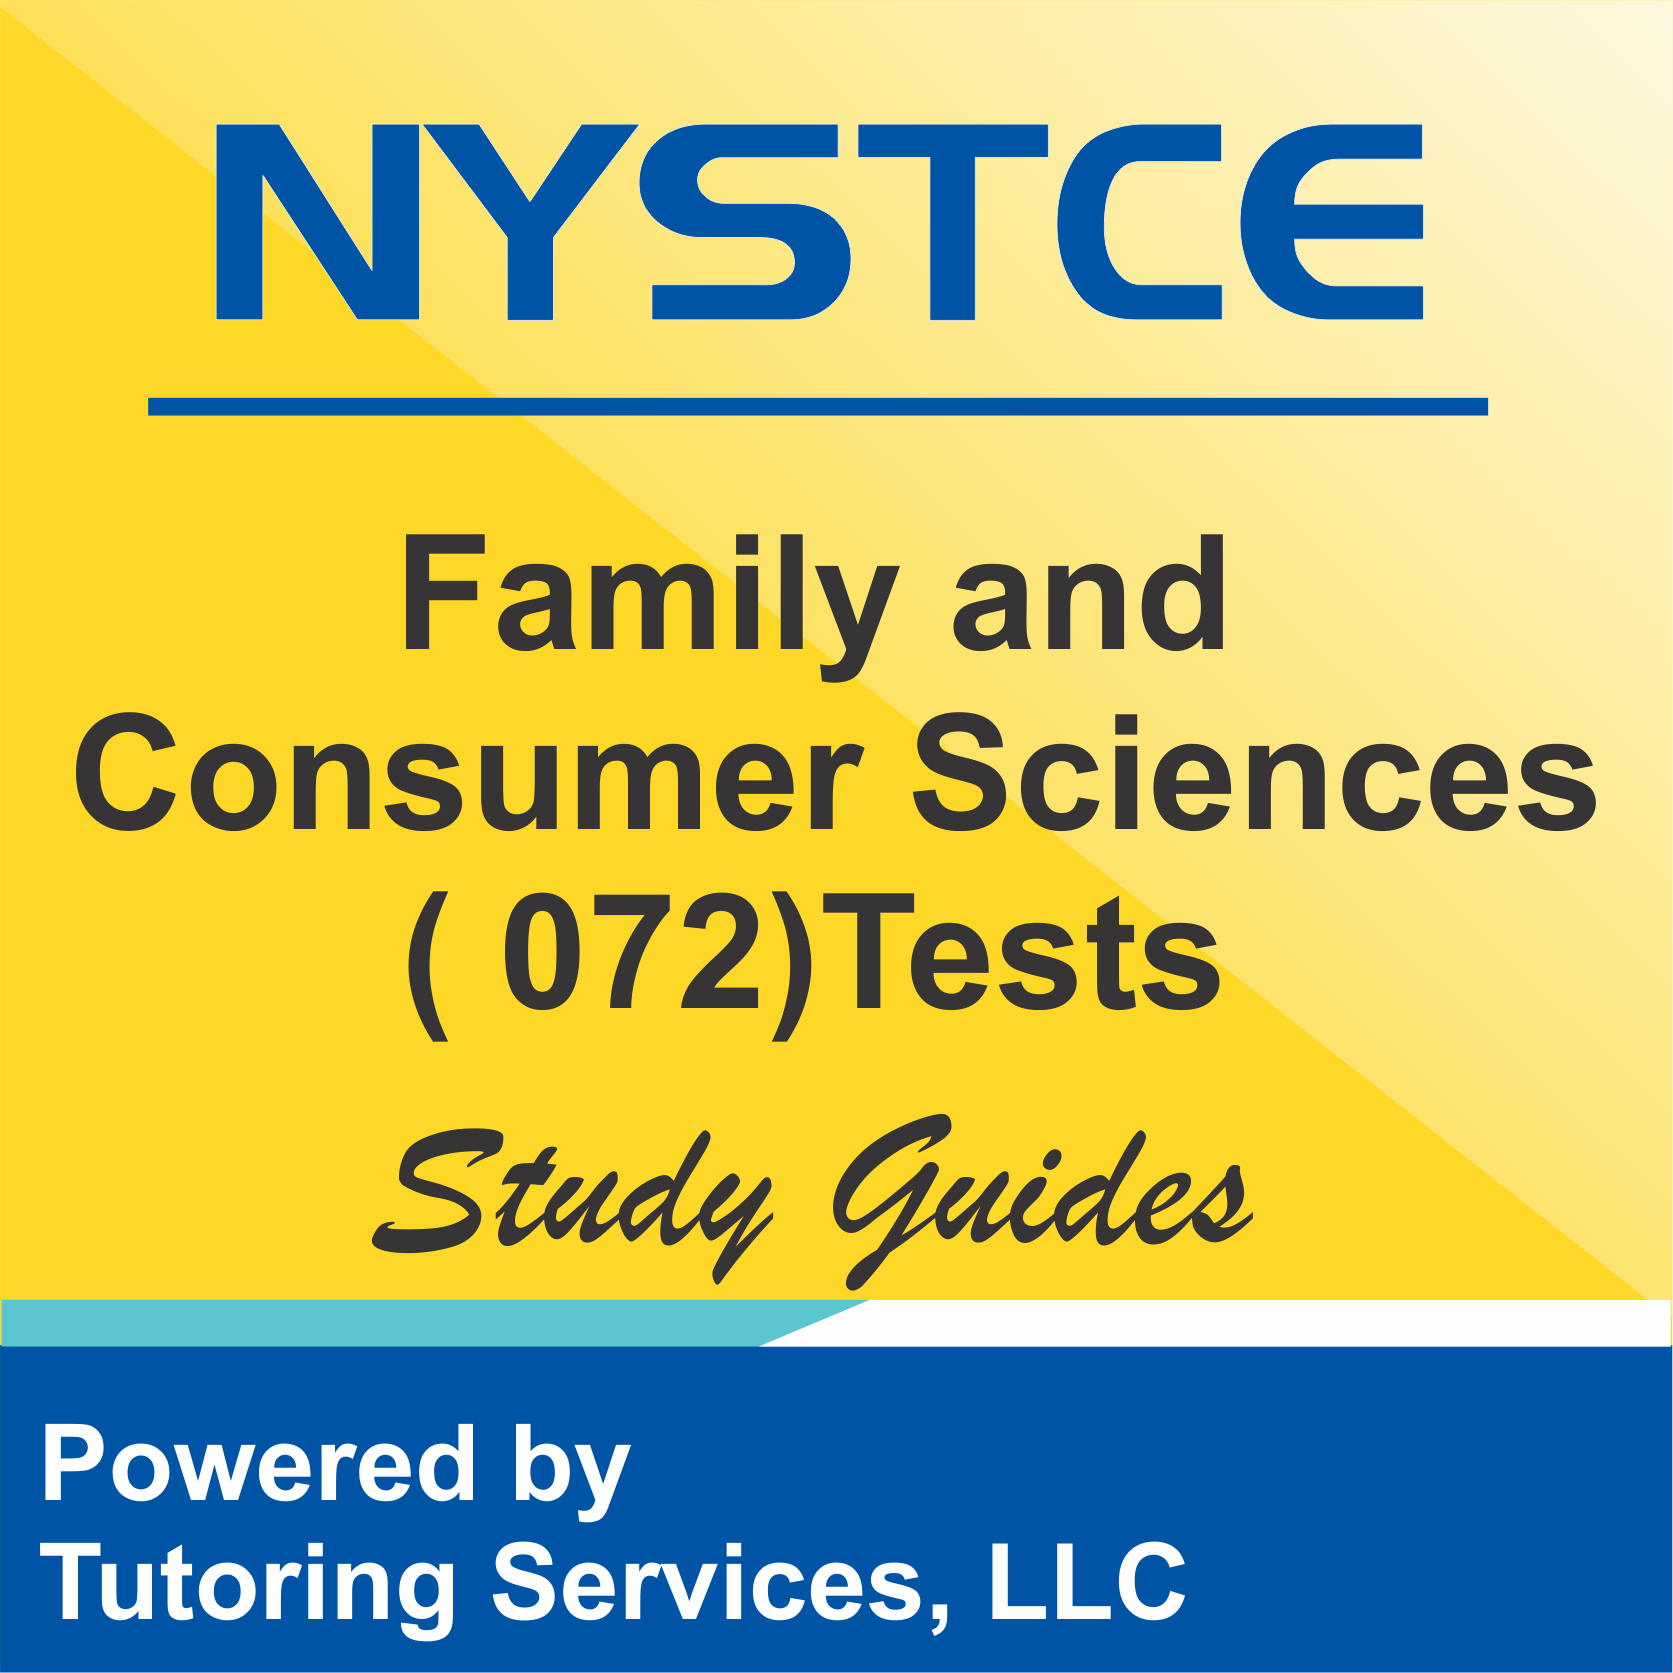 NYSTCE Teacher Certification Test Information for Family and Consumer Sciences 072